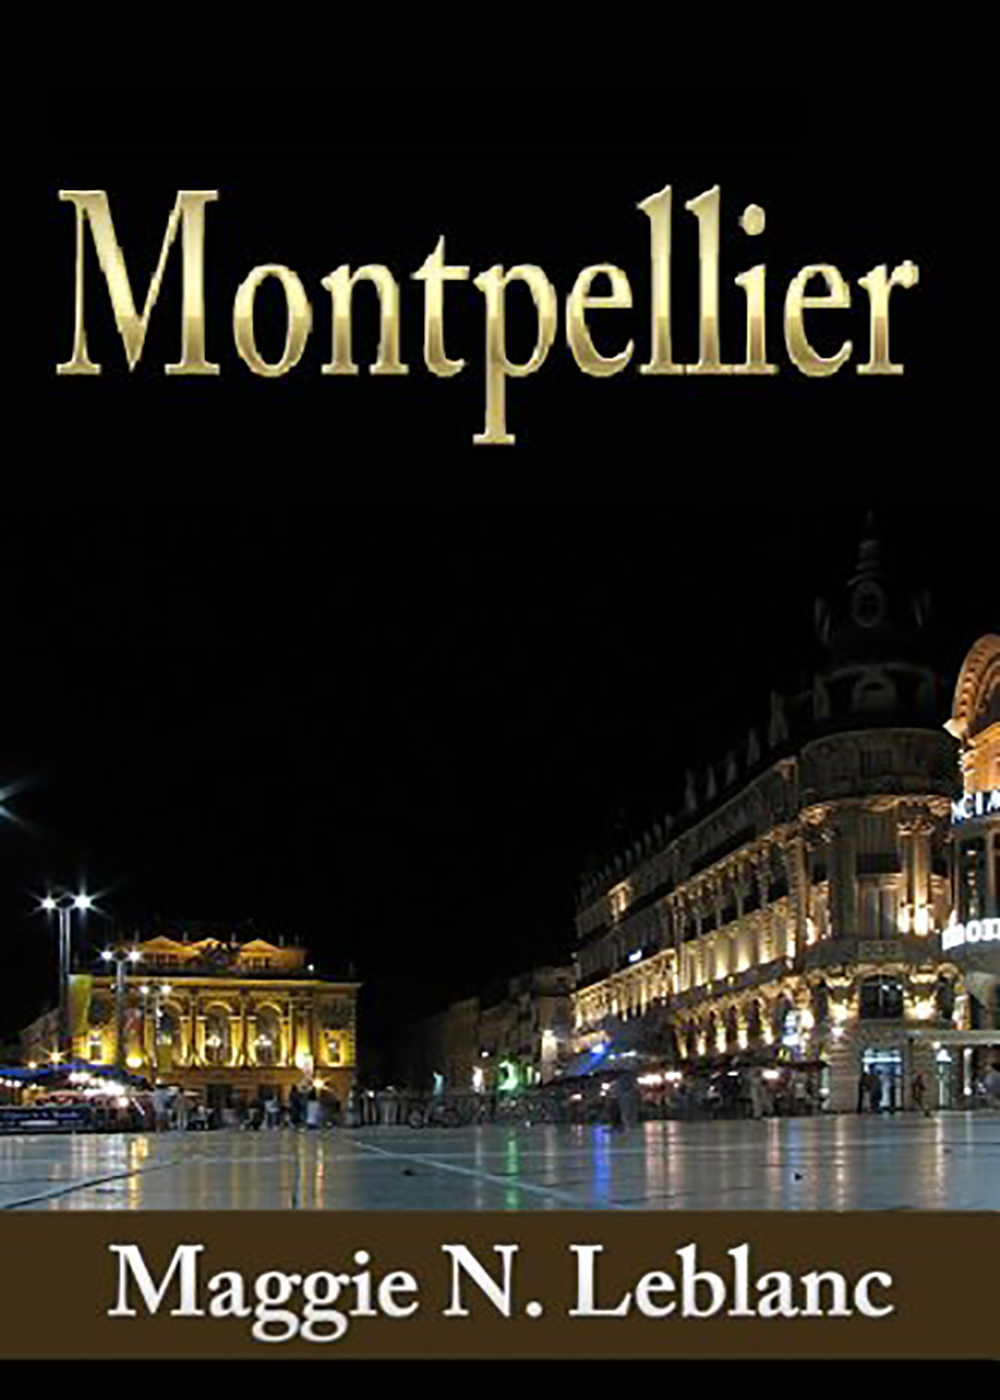 Maggie N. Leblanc - A Jewel In France: Montpellier In Languedoc Roussillon